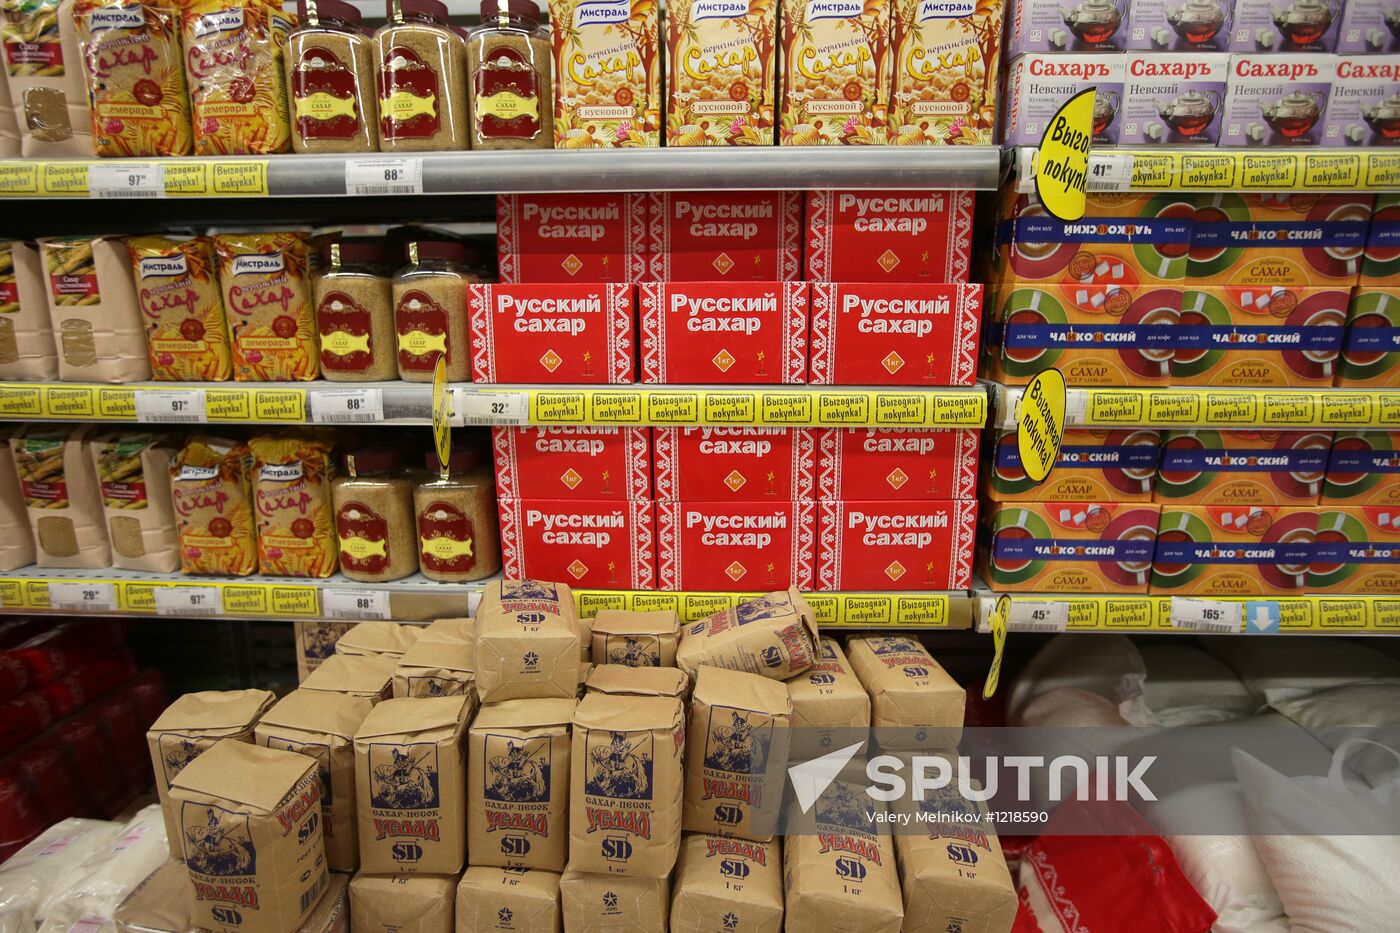 New Karusel hypermarket launched